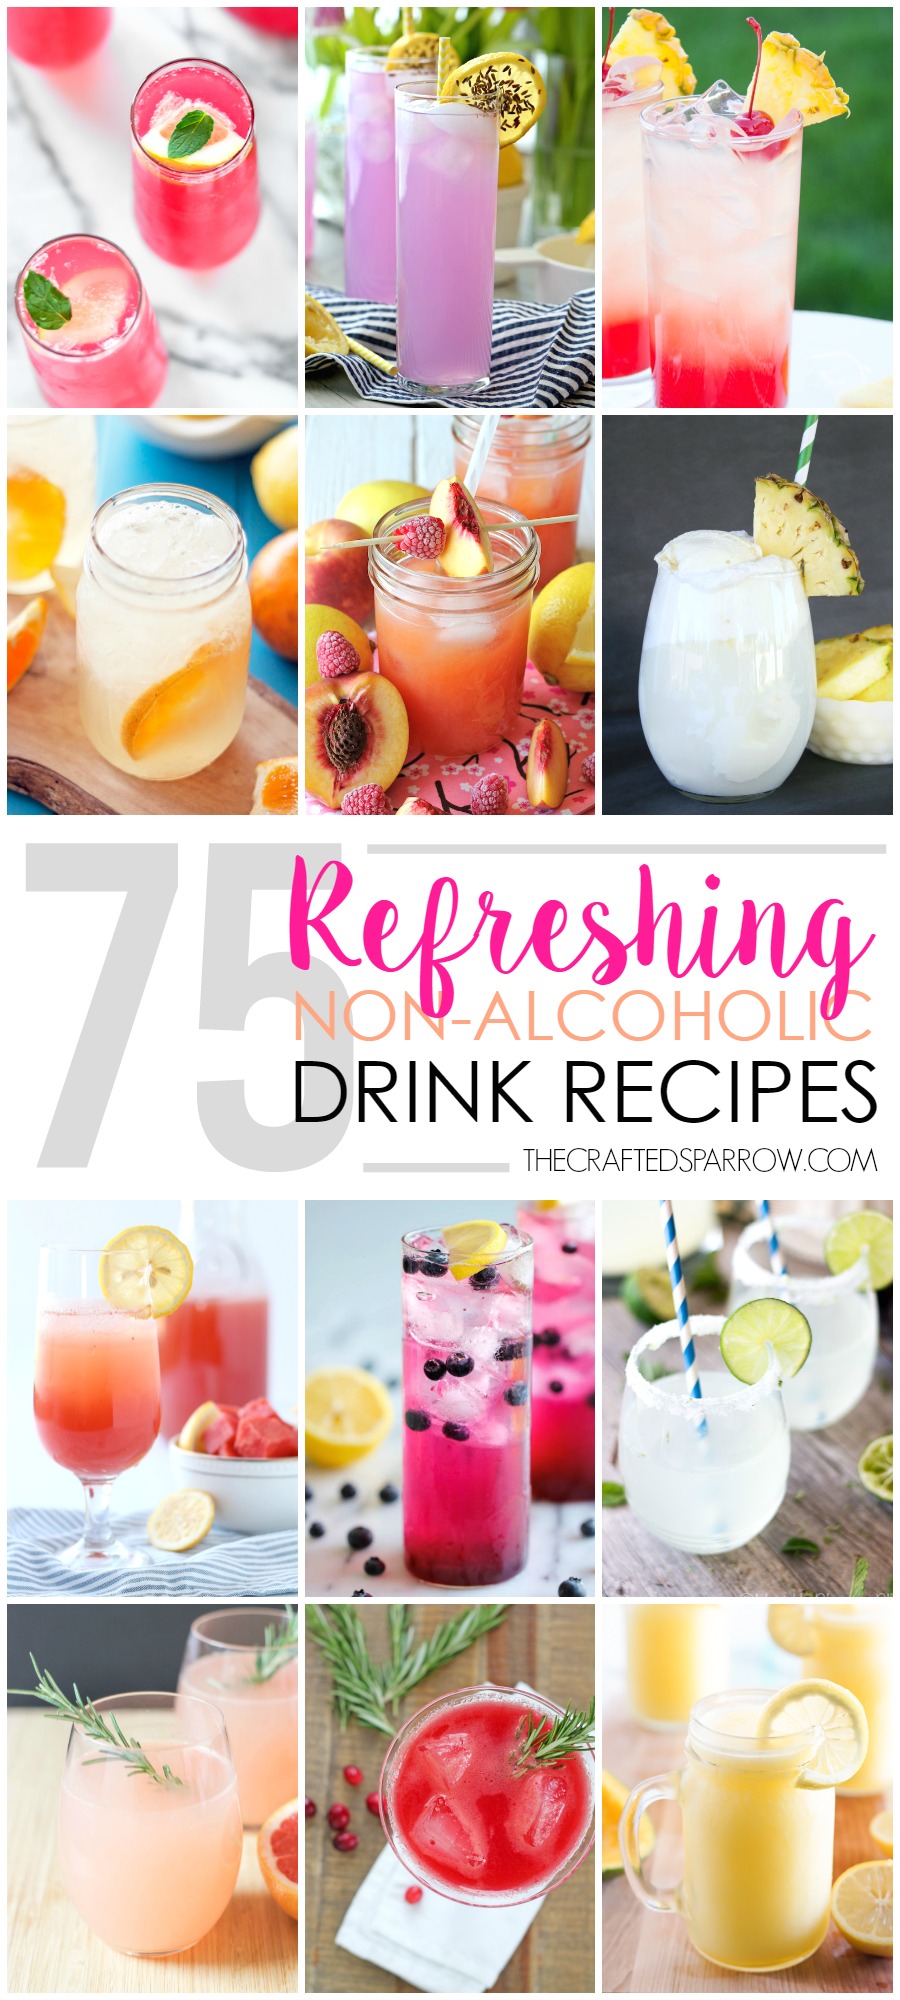 75 Refreshing Non-Alcoholic Drink Recipes